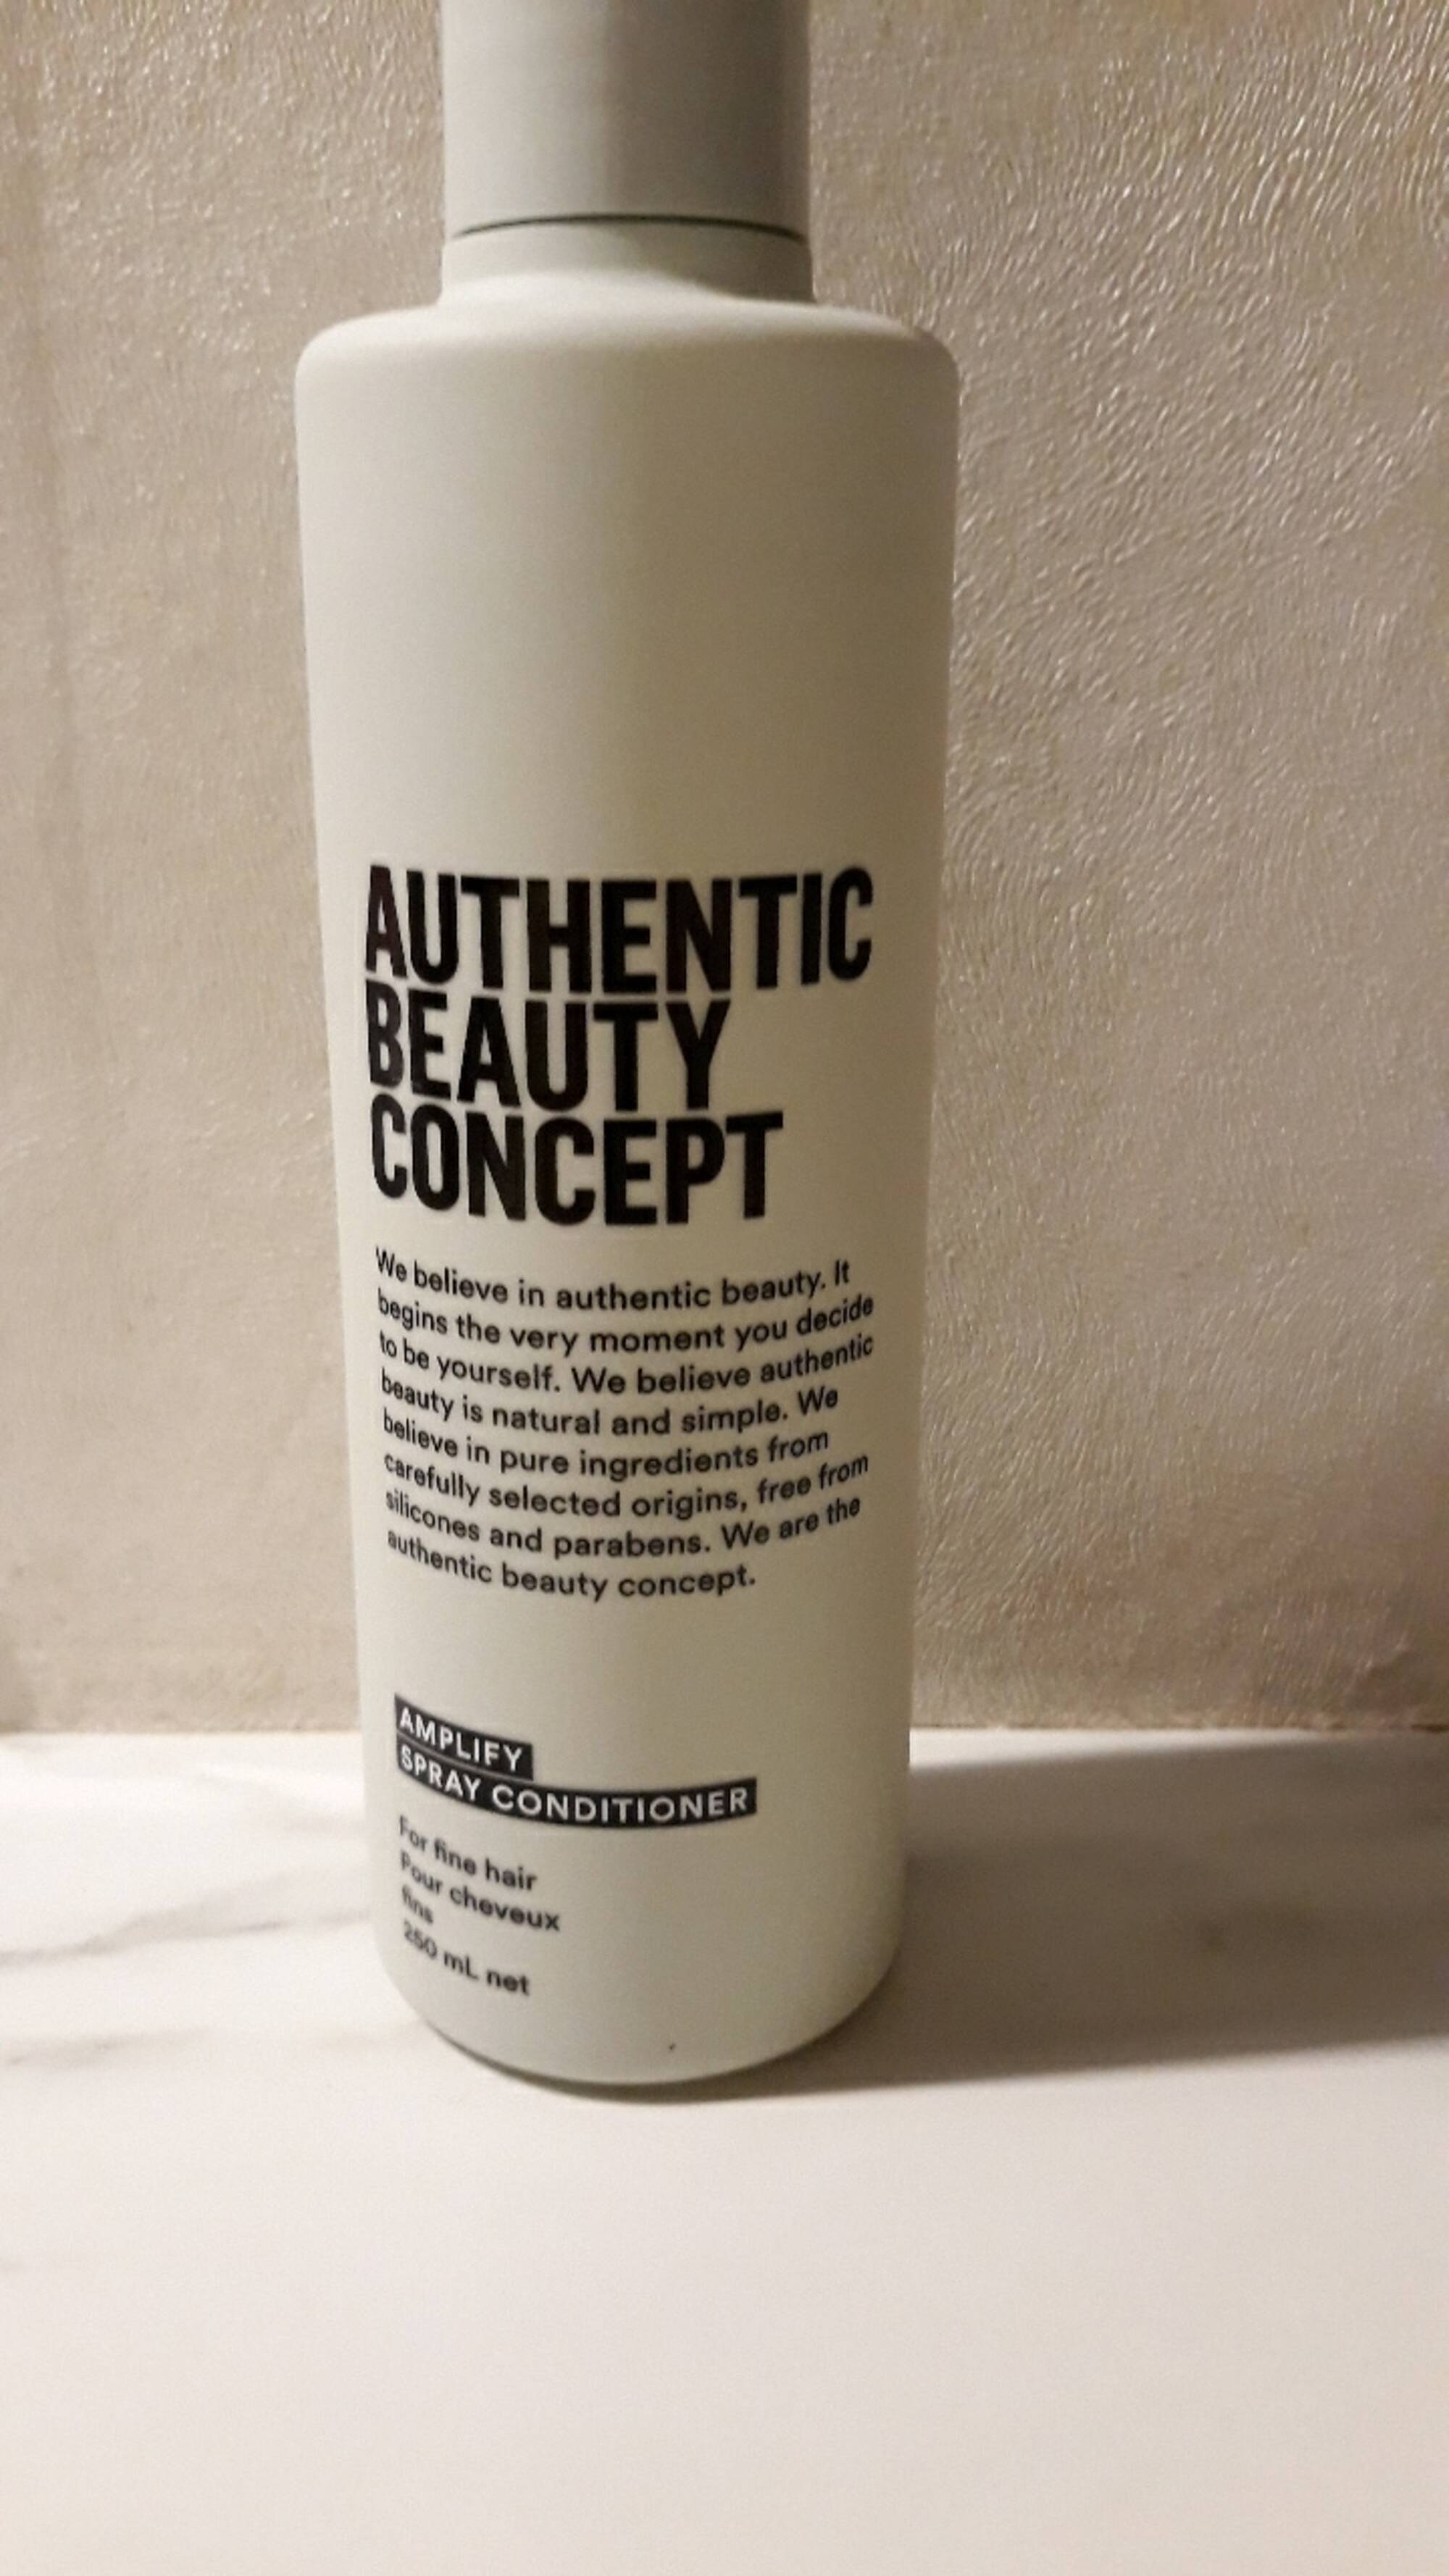 AUTHENTIC BEAUTY CONCEPT - Amplify spray conditioner 